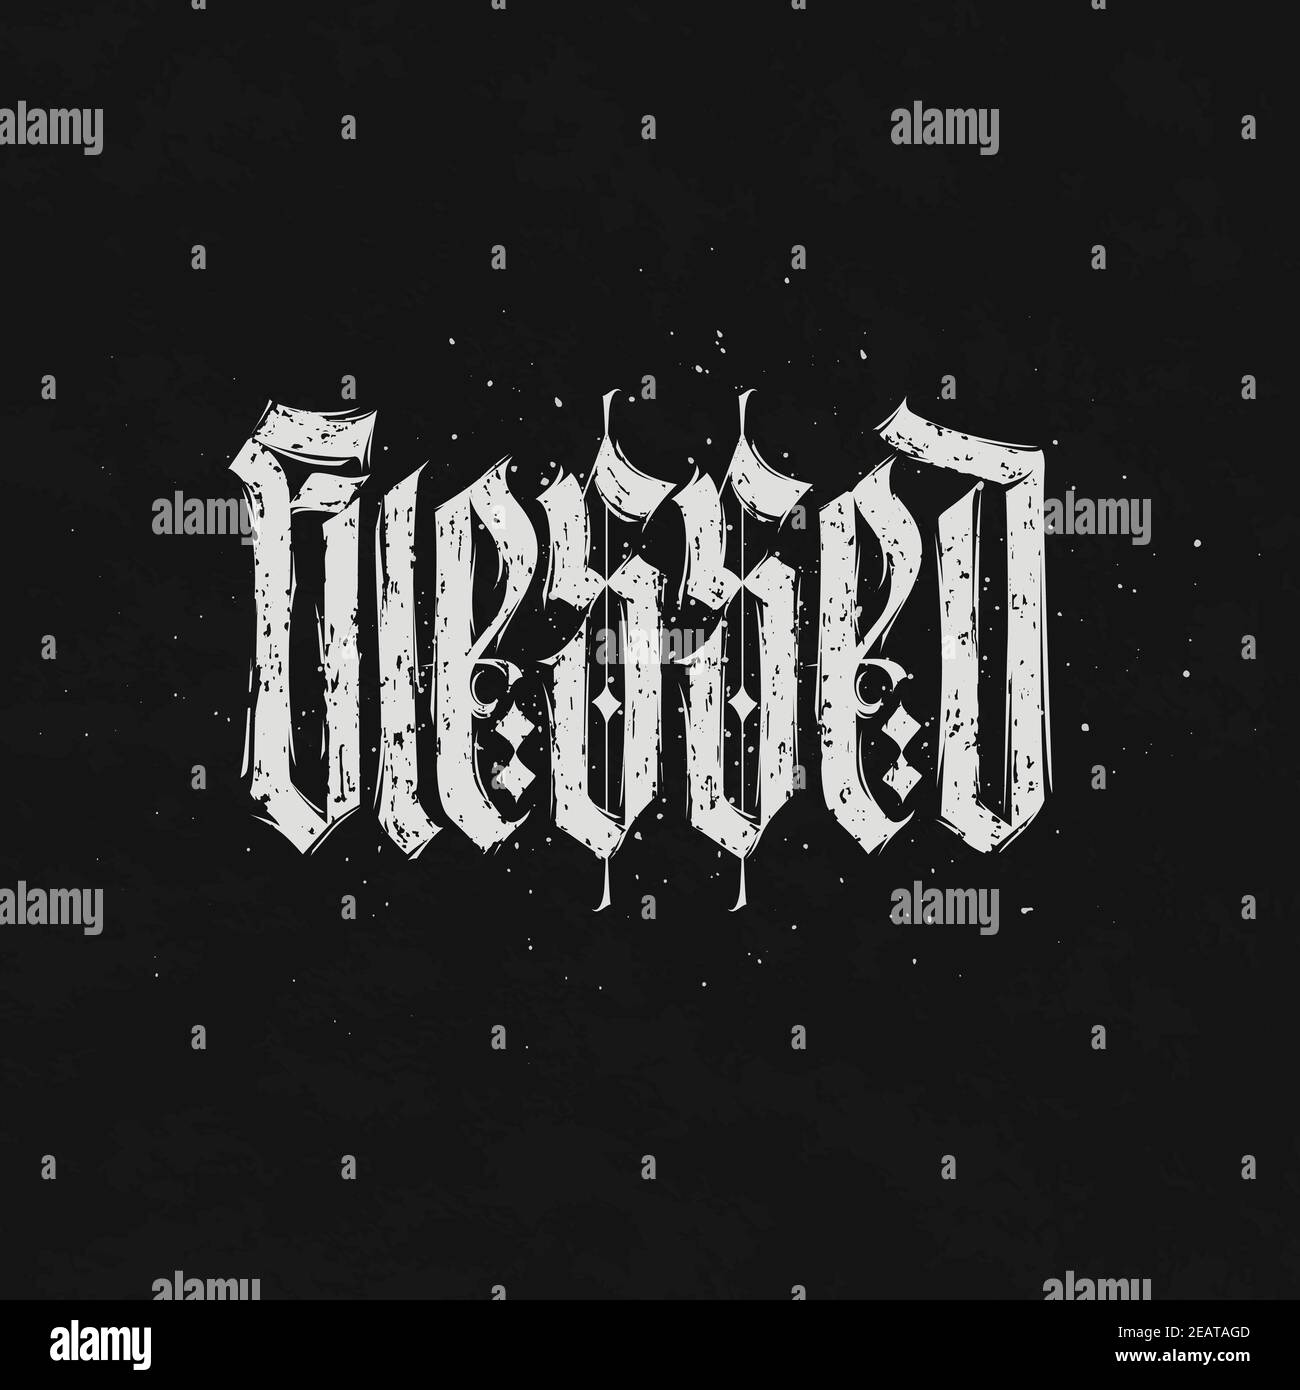 Blessed. Blackletter hand drawn motivation quote. Textur high ghotic calligraphy typeface on grunge black background. Perfect for T-shirts, prints or Stock Vector